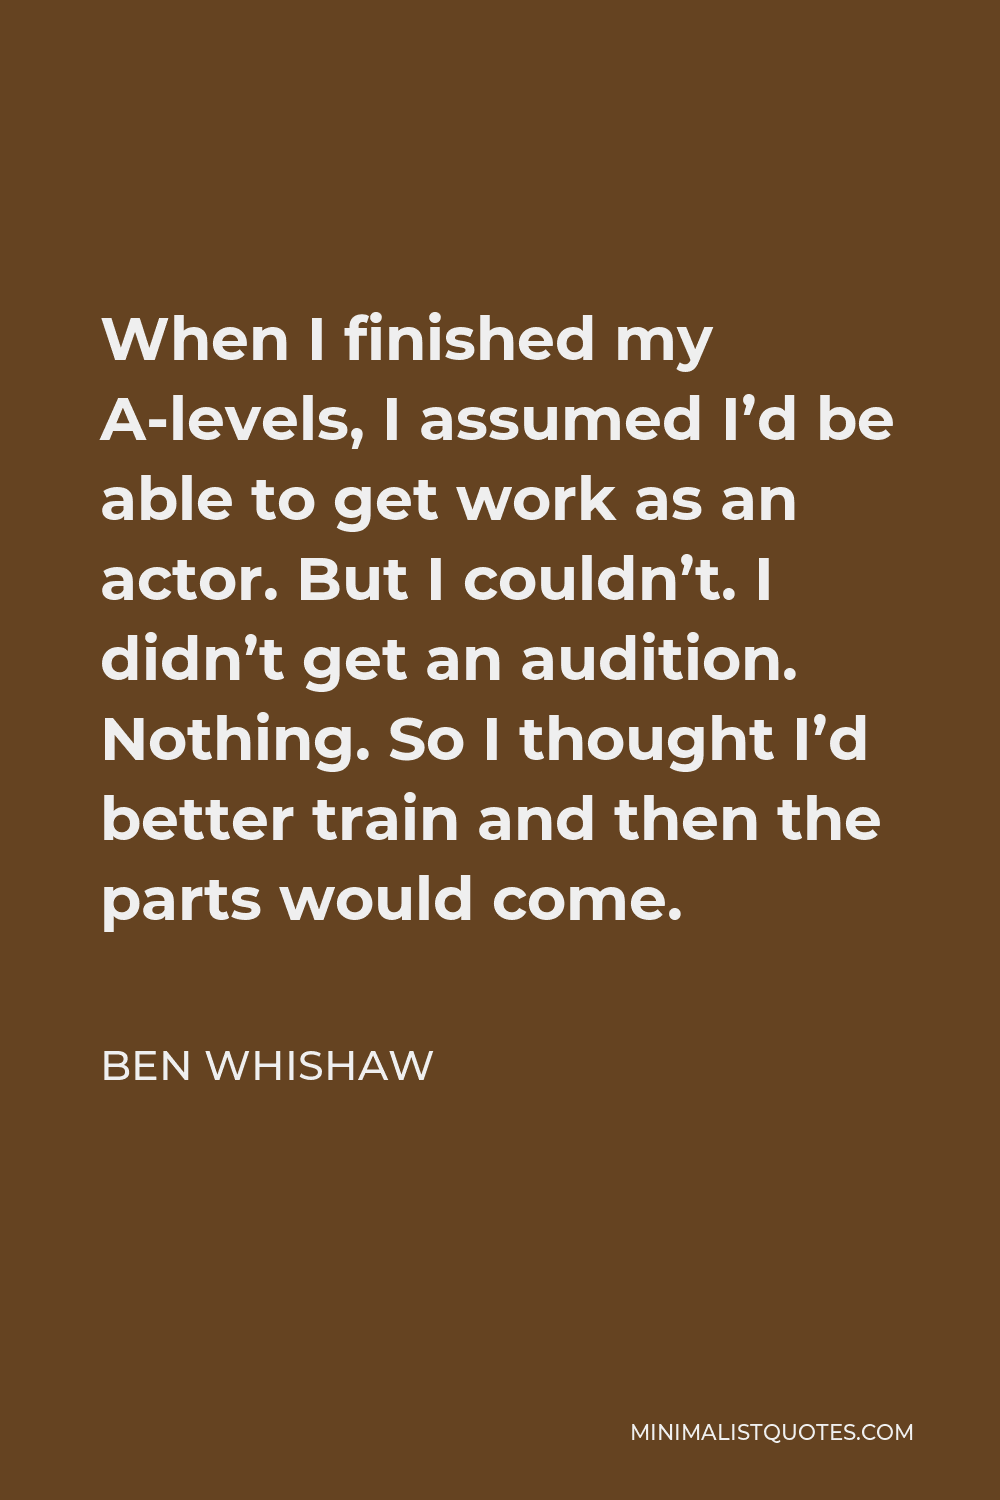 Ben Whishaw Quote - When I finished my A-levels, I assumed I’d be able to get work as an actor. But I couldn’t. I didn’t get an audition. Nothing. So I thought I’d better train and then the parts would come.